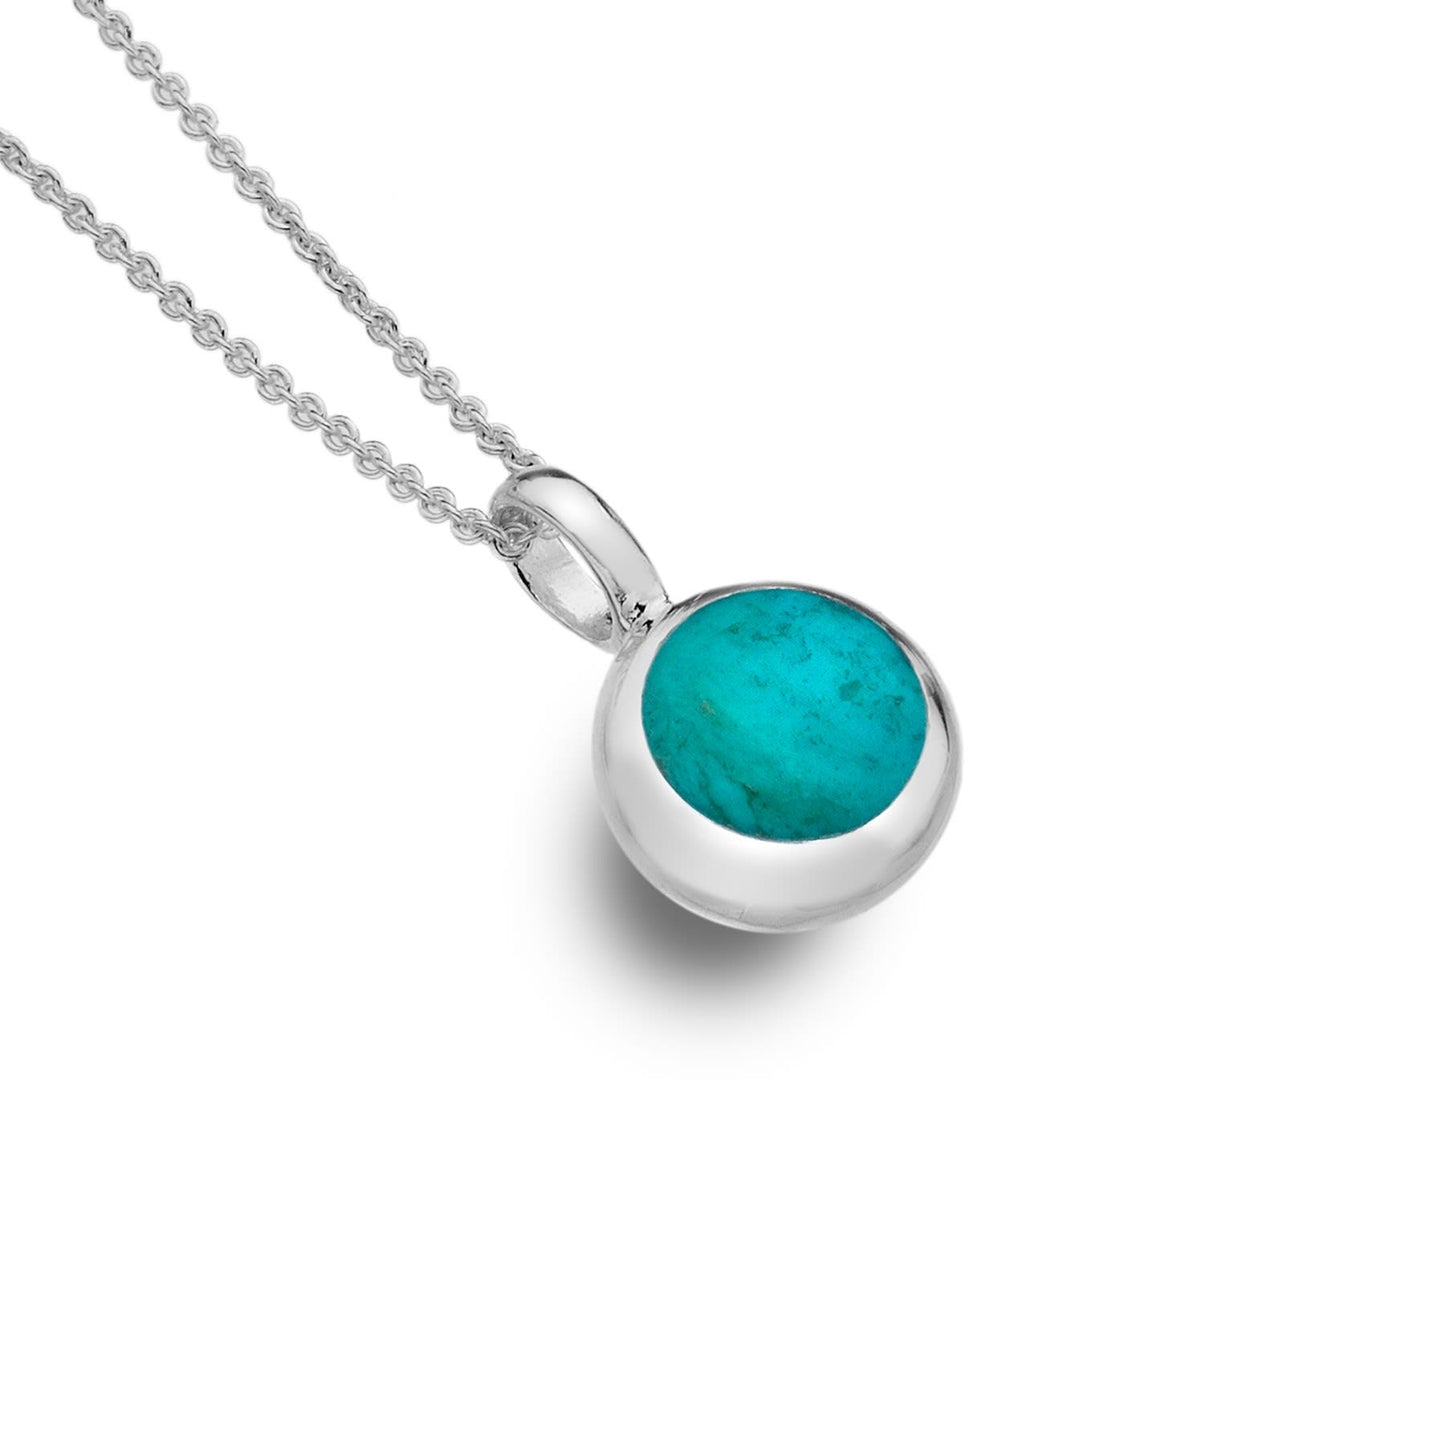 Silver and Turquoise round pendant